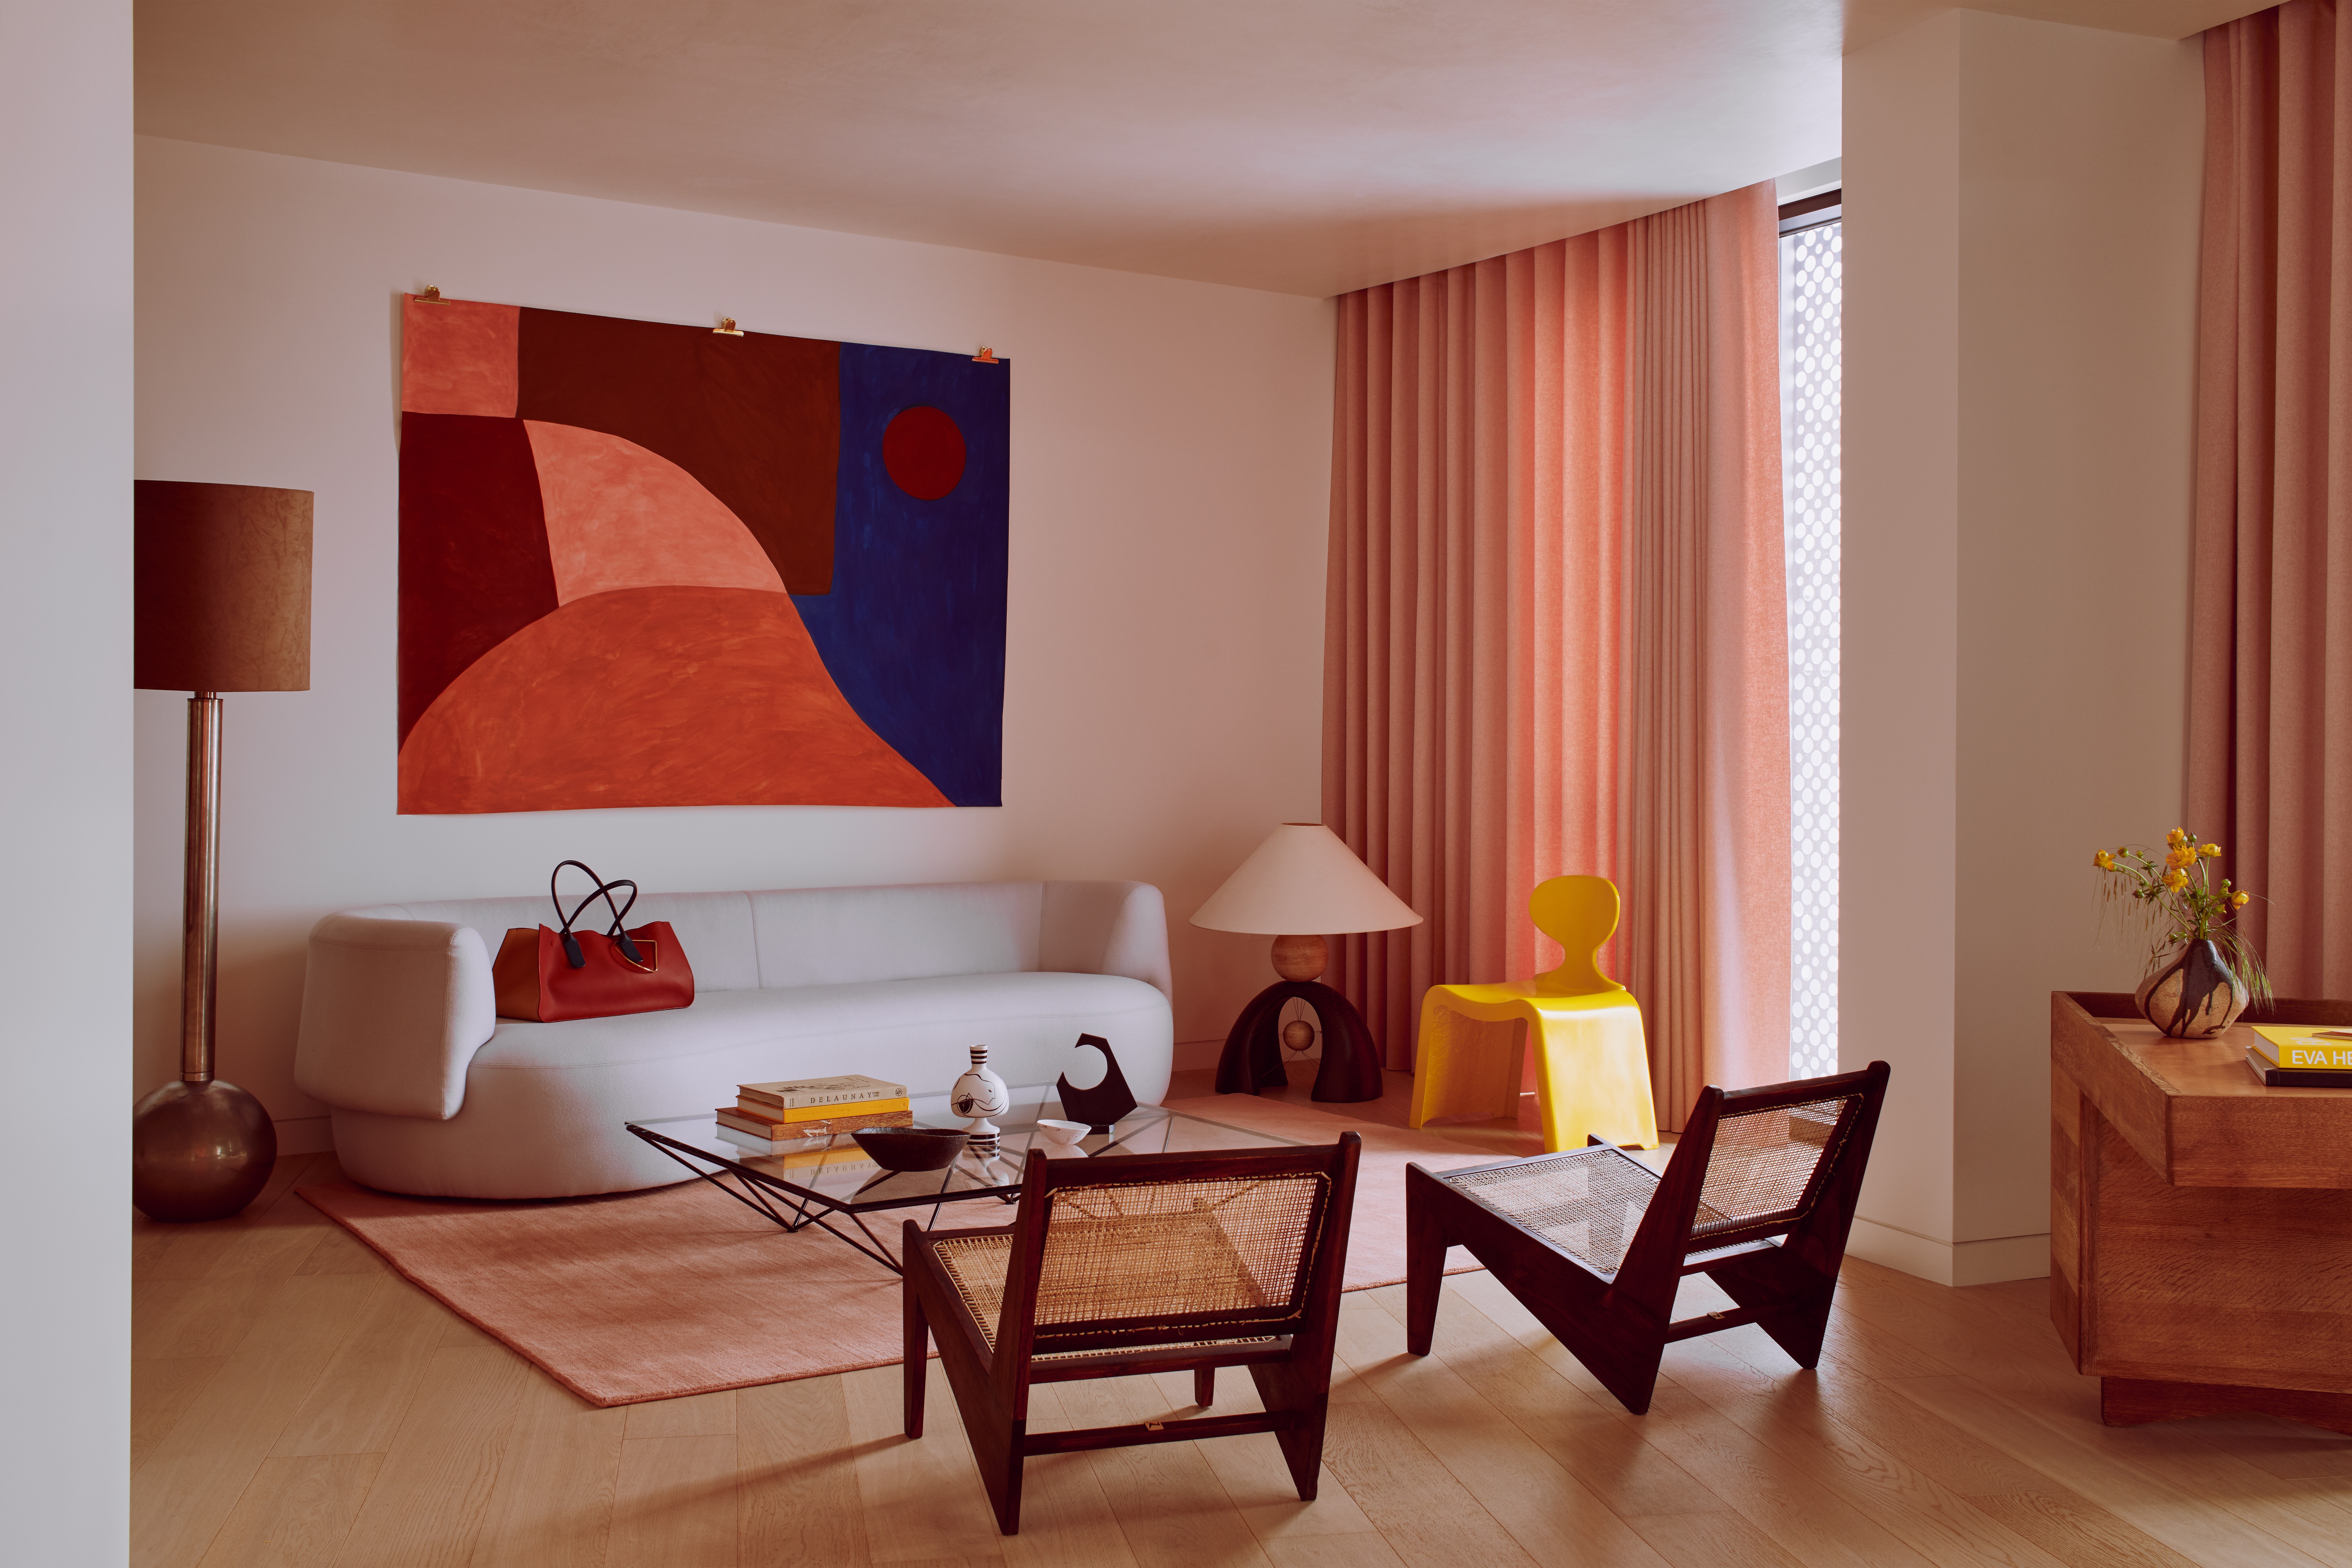 The Gasholders Penthouse’s living room is uncluttered, allowing the furniture and artworks – including the mural by Caroline Denervaud – to claim the attention they deserve. Photo: Michael Sinclair